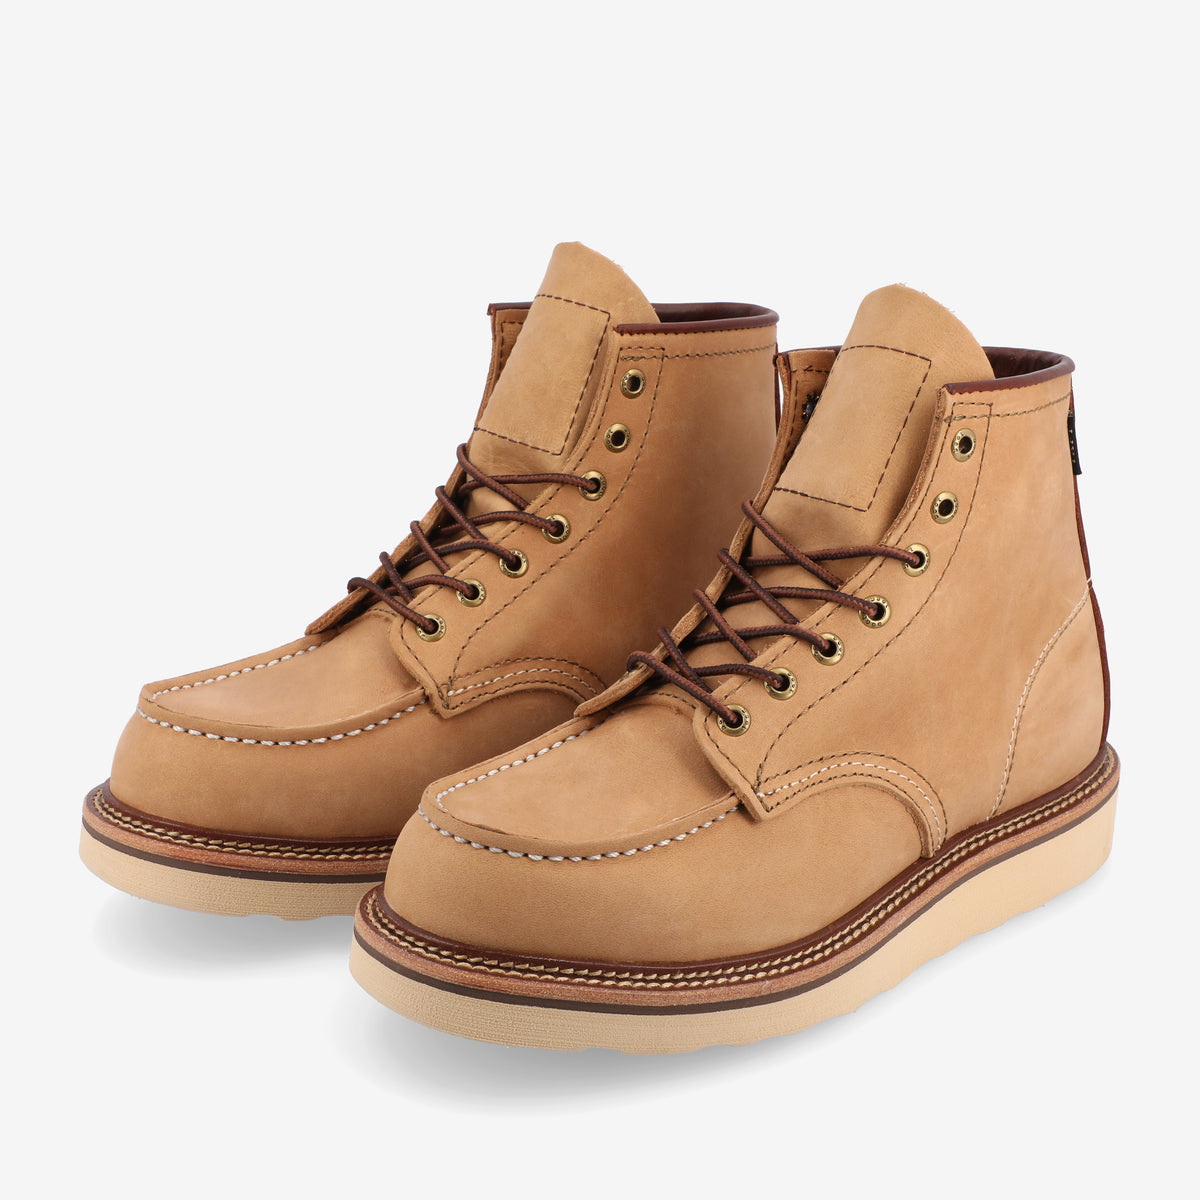 TAFT 365 Boots Collection - Everyday Mens Boots | TAFT